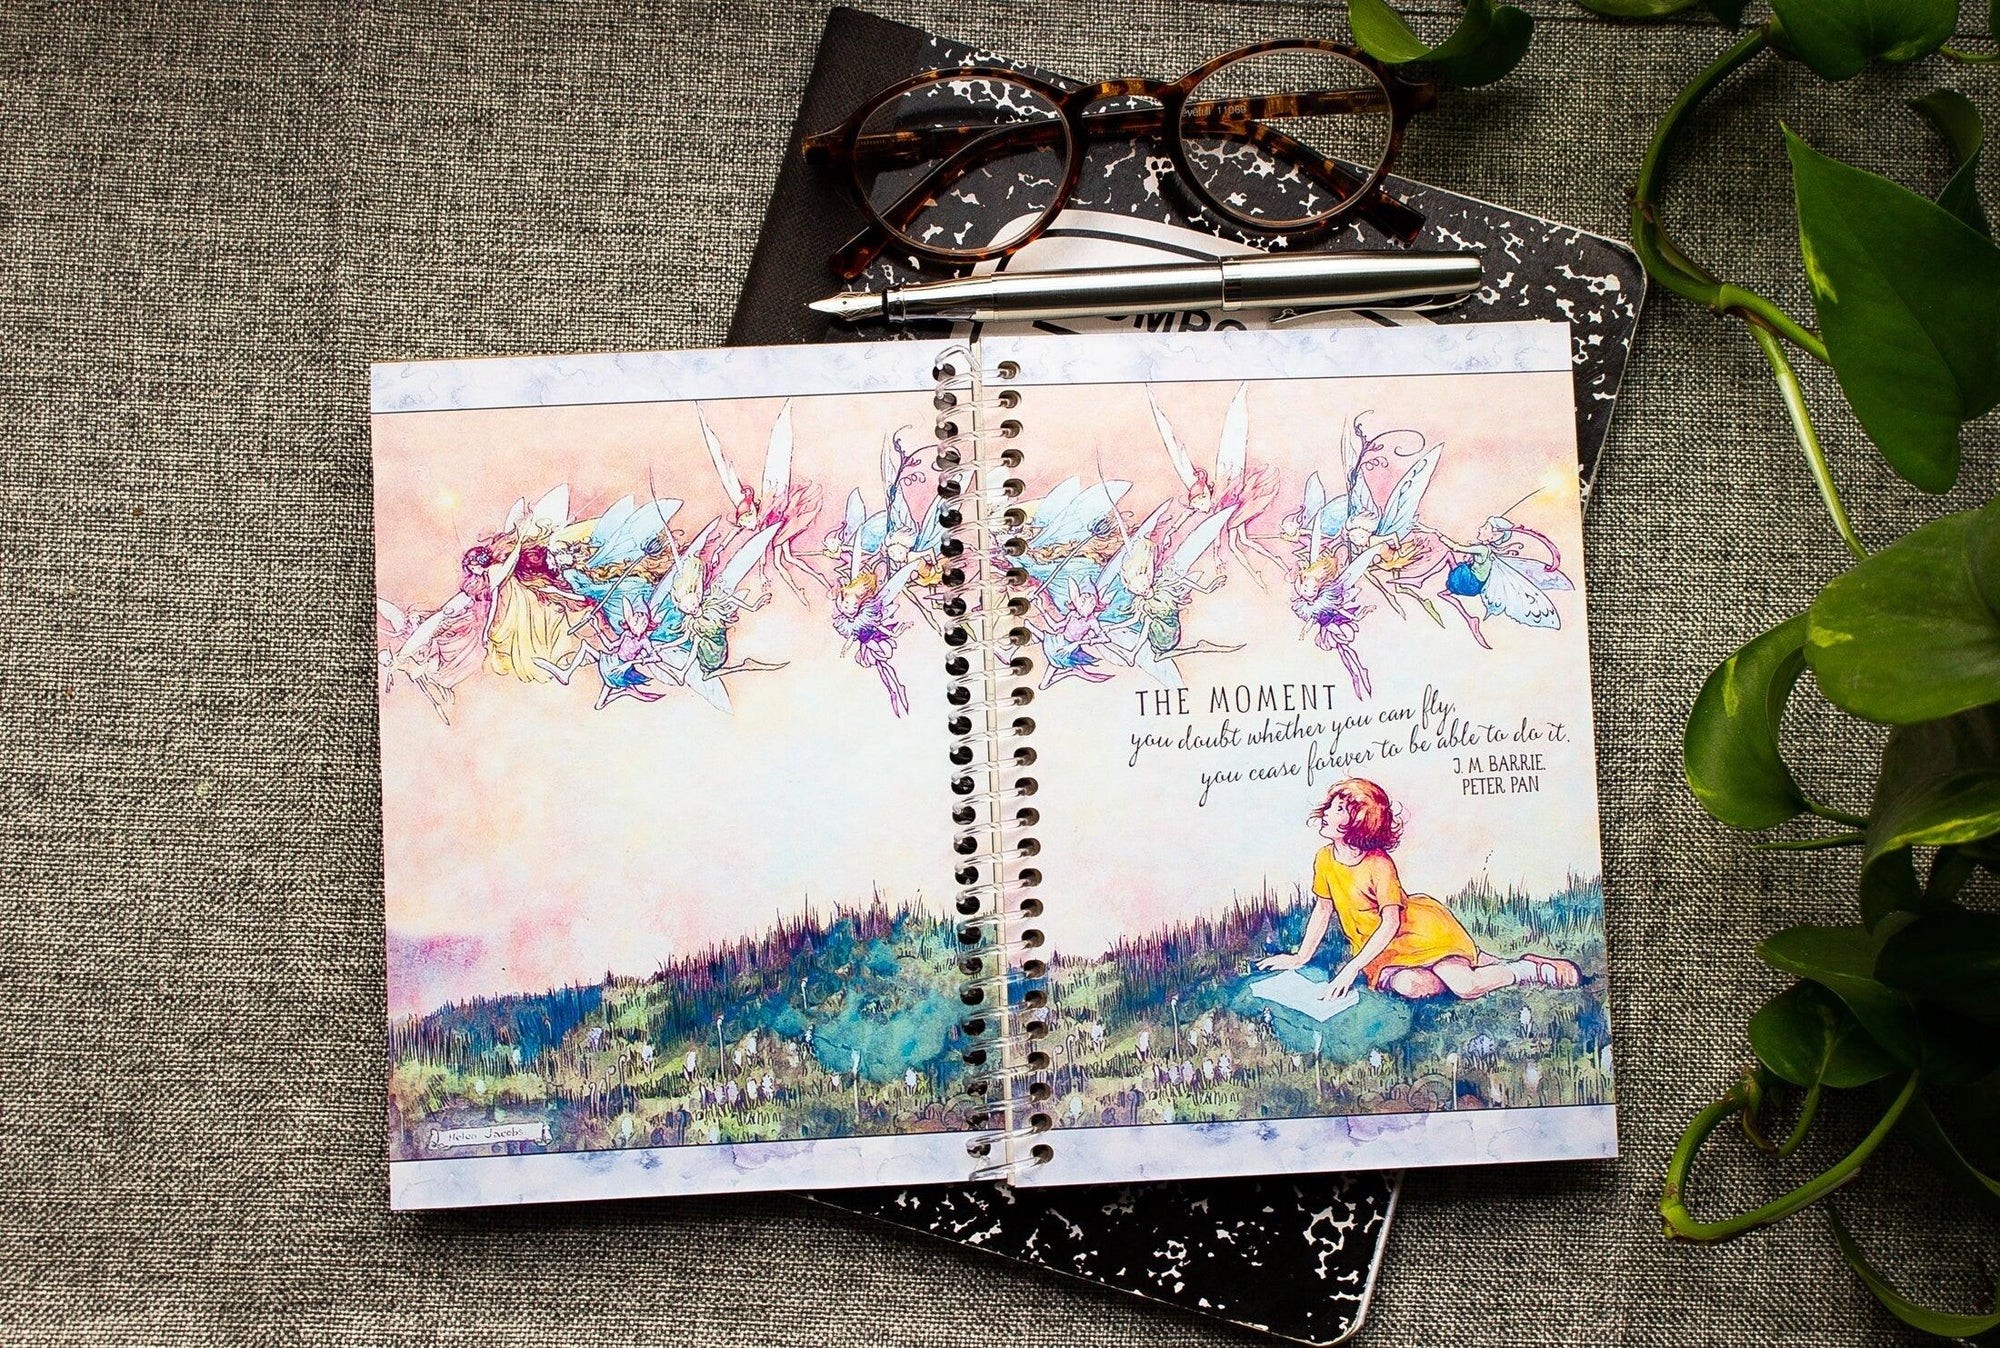 Spiral Bound Notebook - Fairies & Girl Reading Note Book - Peter Pan Quote Journal - Gift for Granddaughter - Lined and Dot Grid Pages